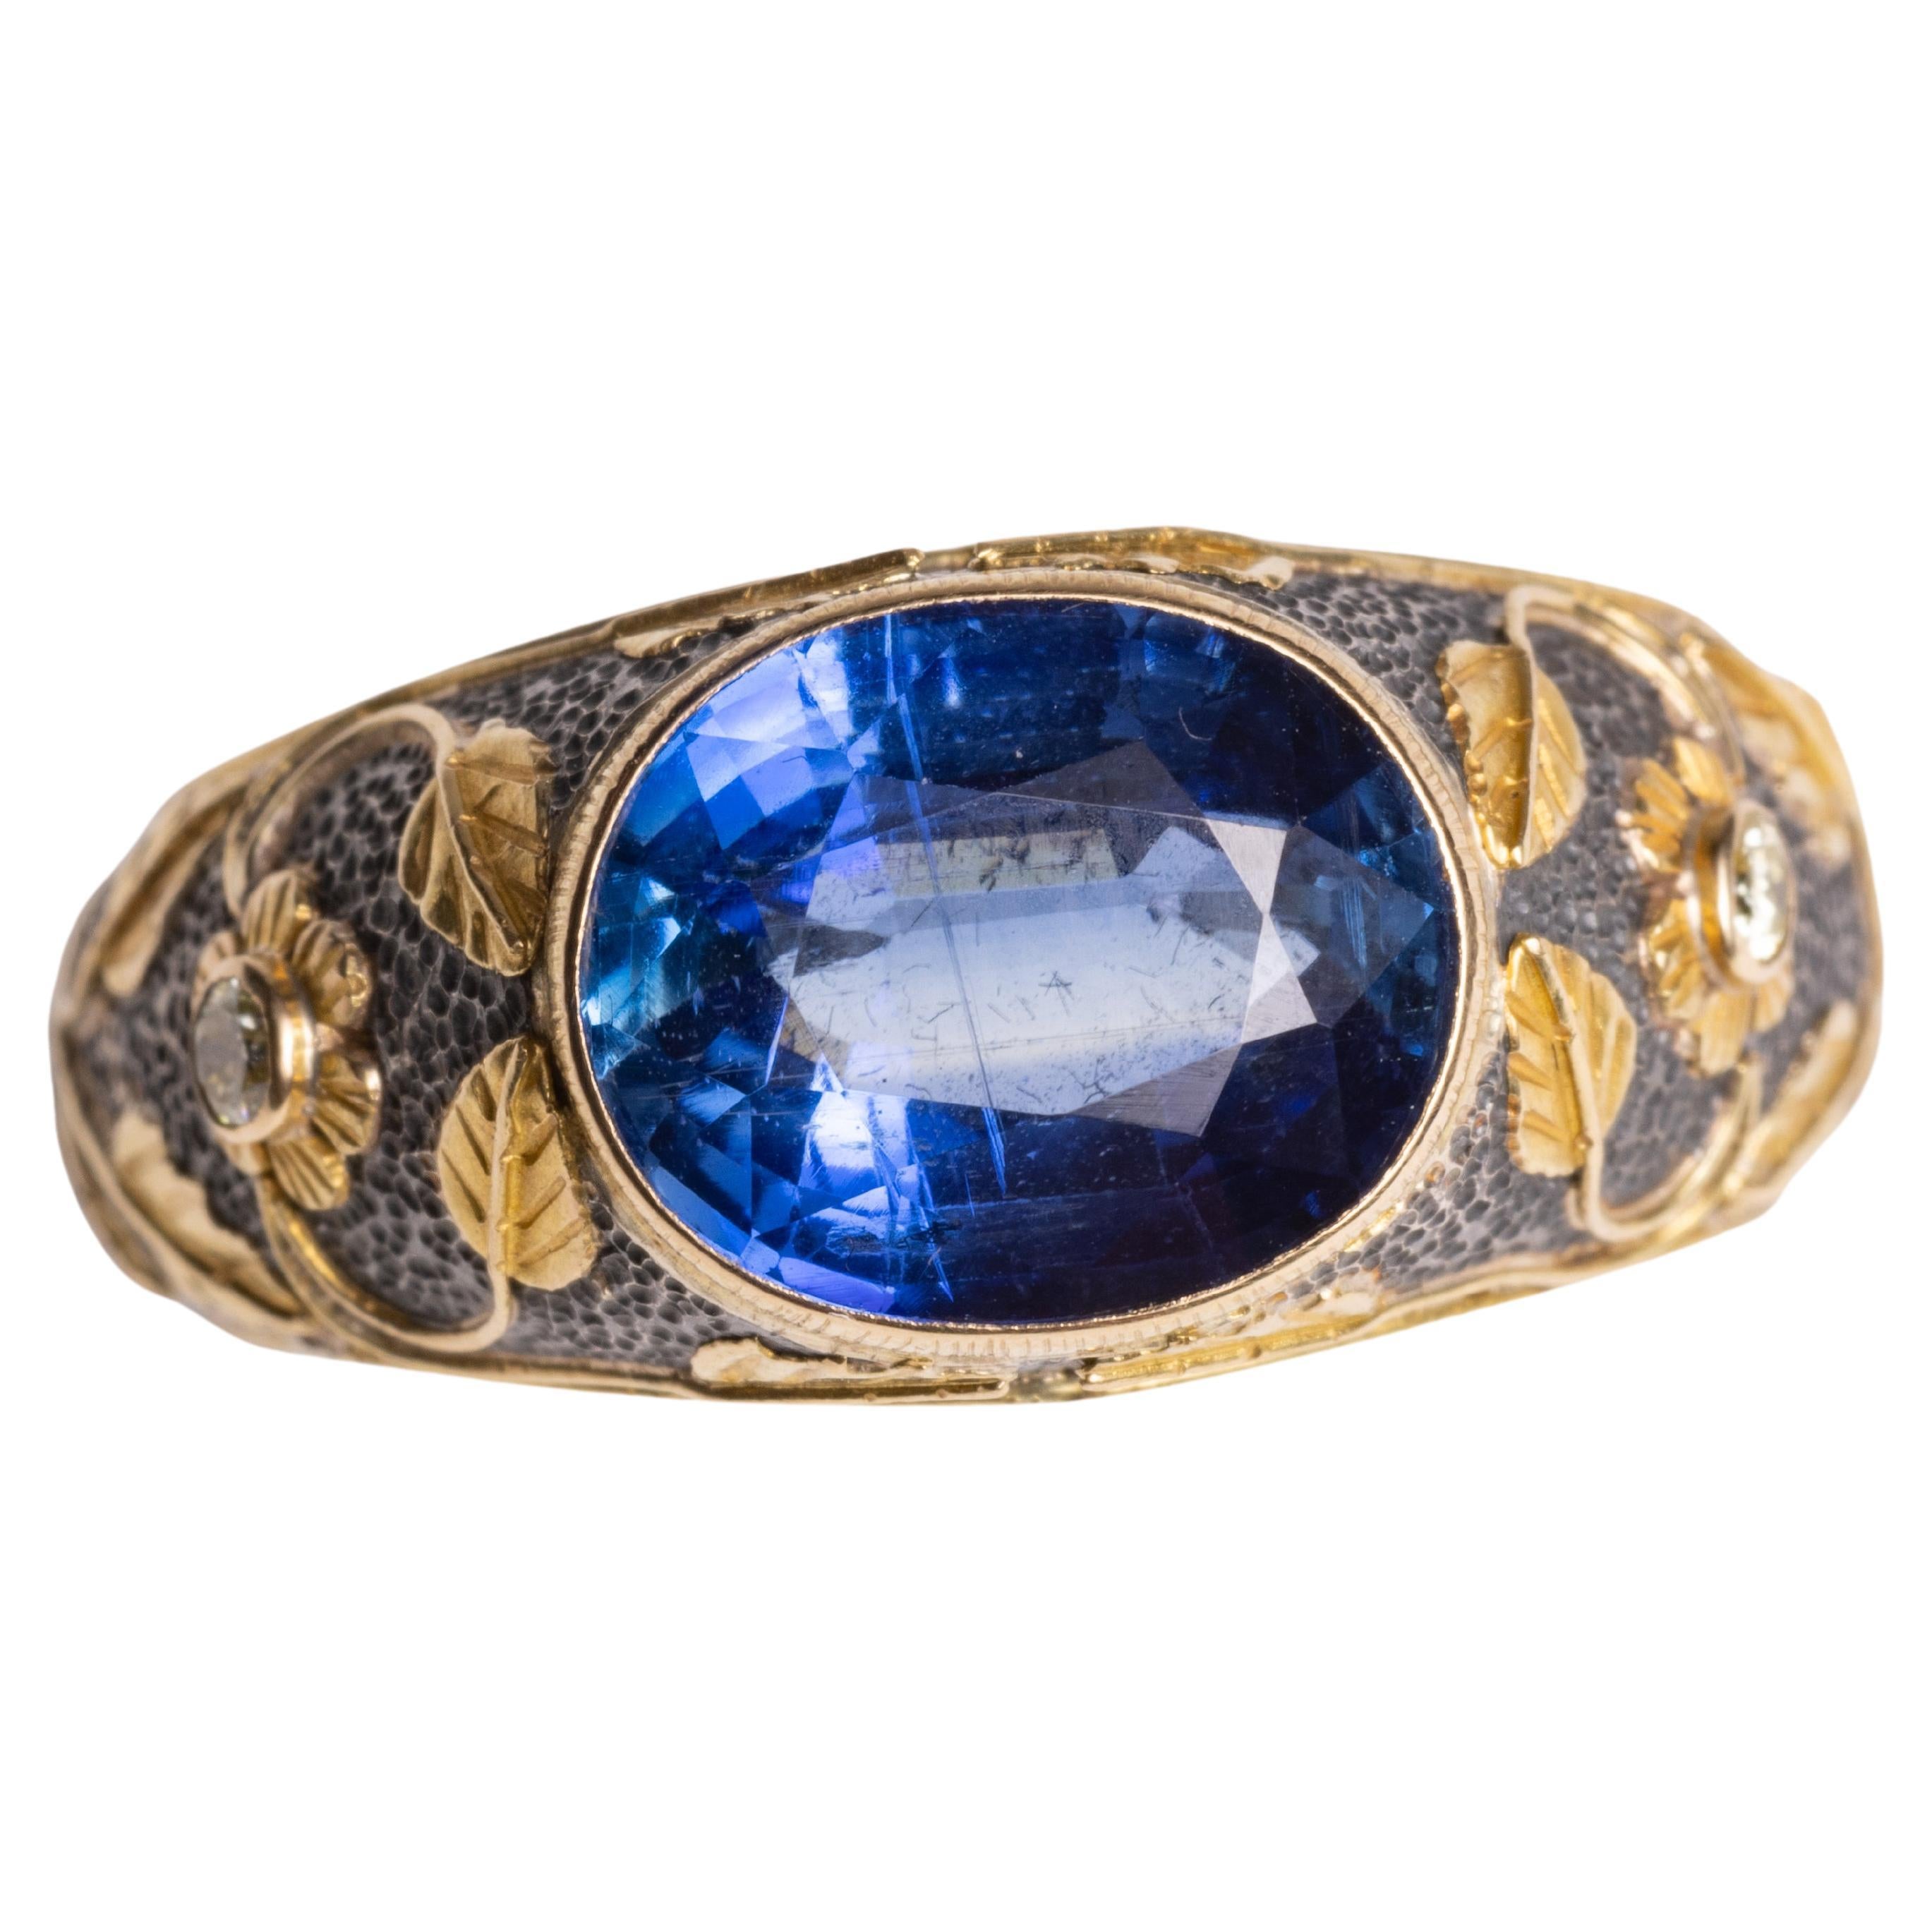 A stunning faceted, oval blue kyanite center gemstone in a sterling silver ring with 18K gold overlay in a floral and vine motif.  Two round diamonds create the center of the two flowers on the sides.  Ring size is an 8.

The fine jewelry collection